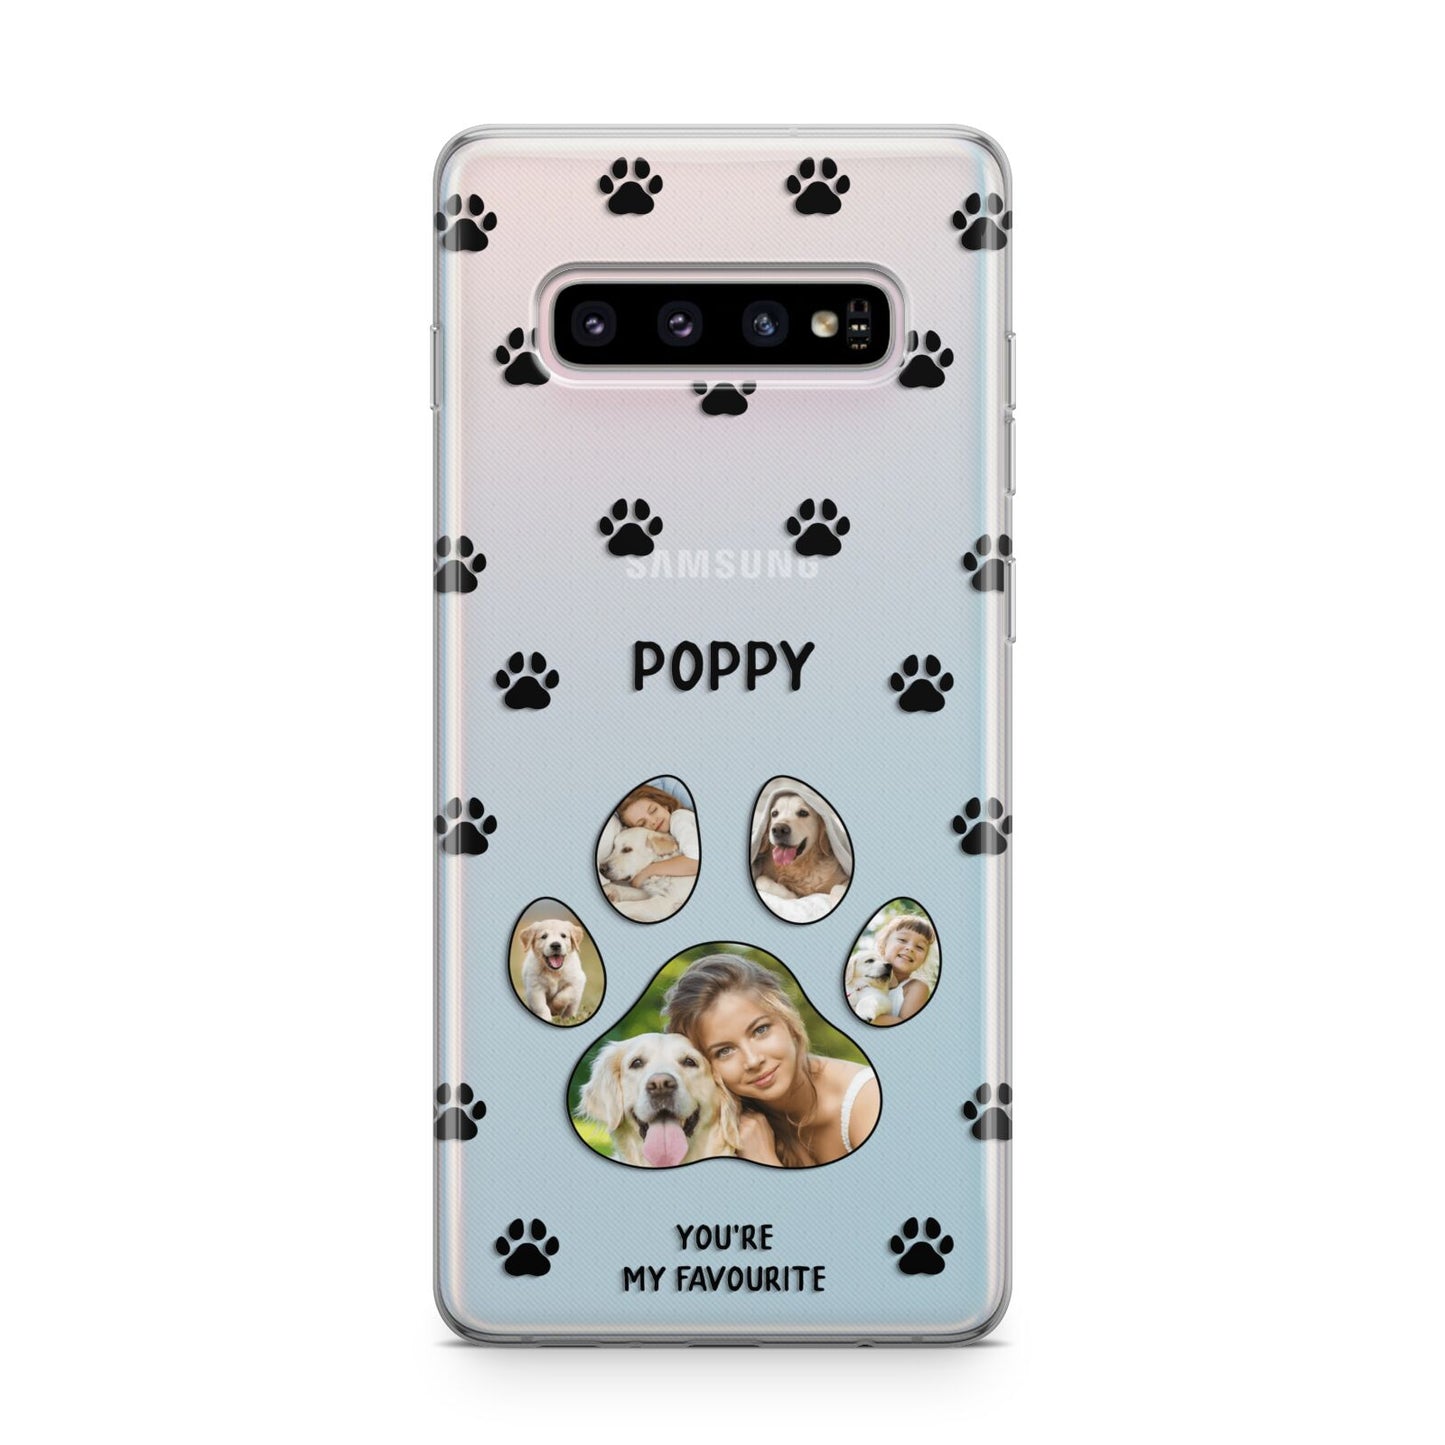 Favourite Dog Photos Personalised Samsung Galaxy S10 Plus Case